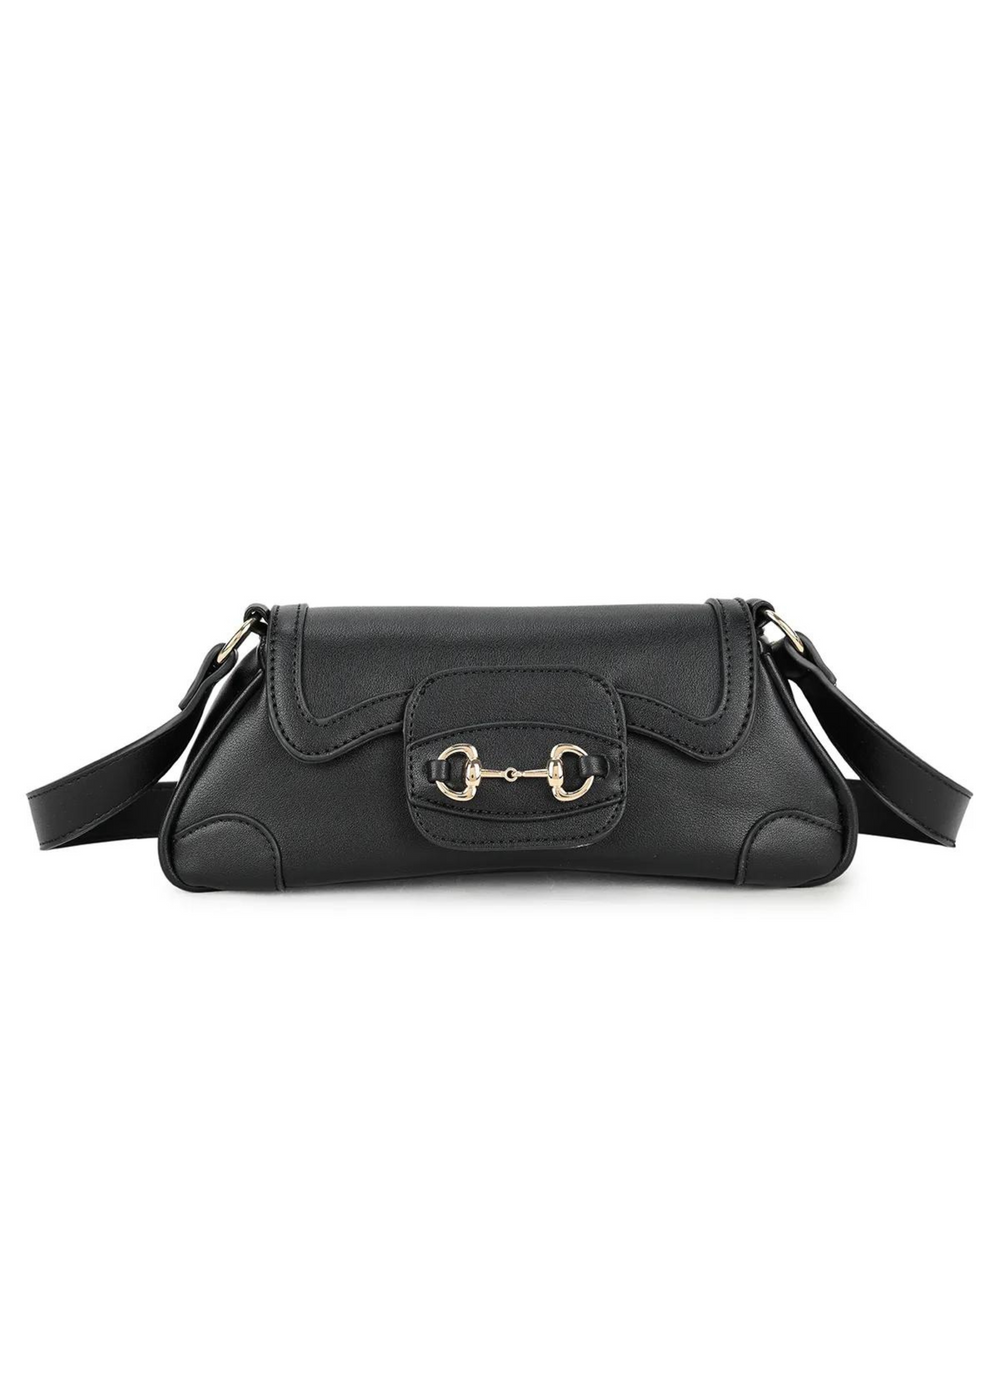 NOVA CROSS BODY BAG WITH BUCKLE DETAIL IN BLACK FAUX LEATHER